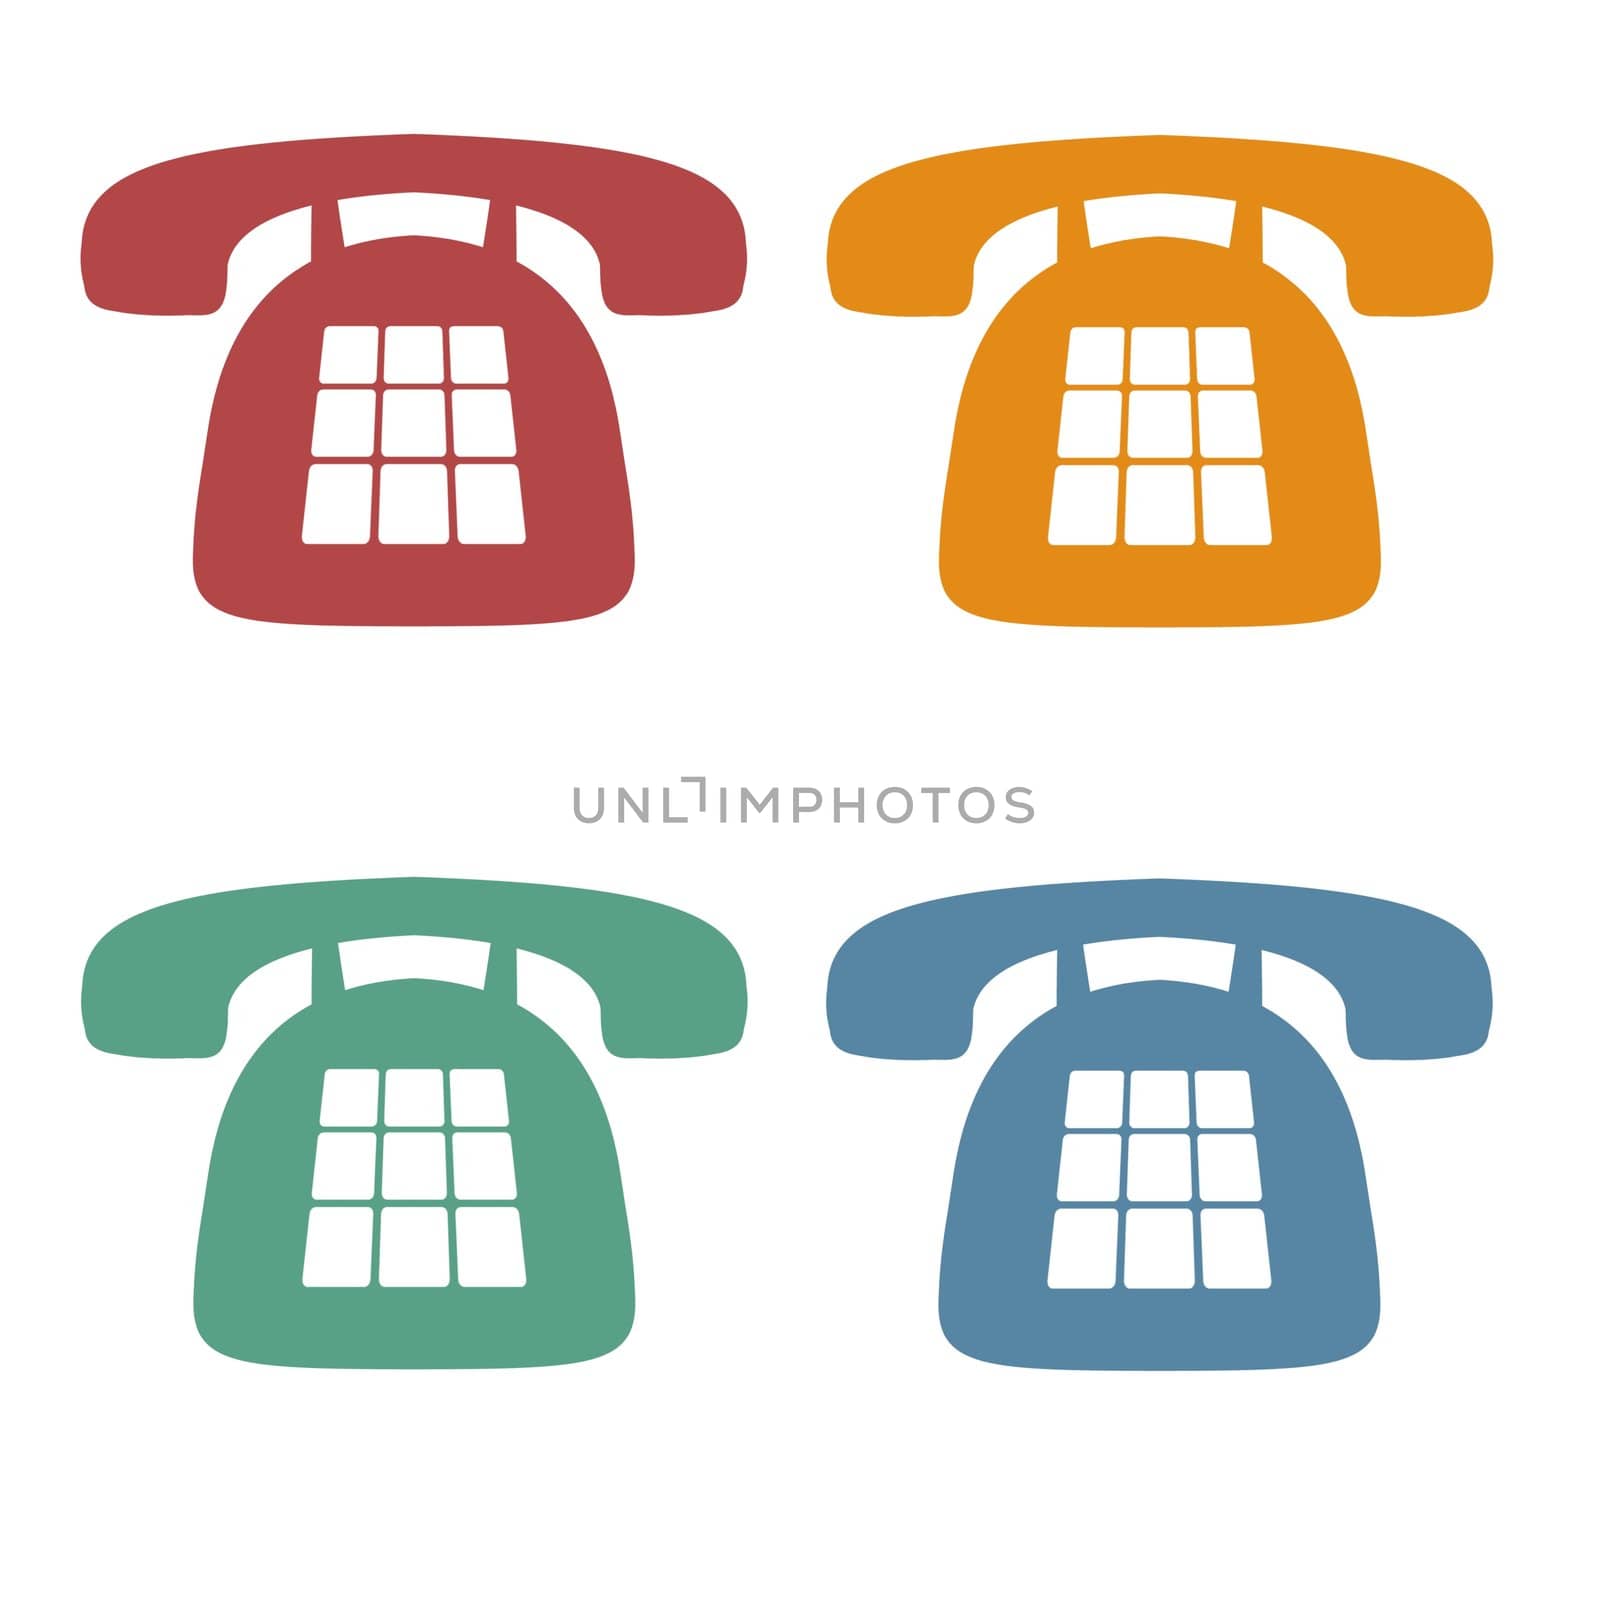 Red, Orange, Green and Blue Phone Icons, on a white background 